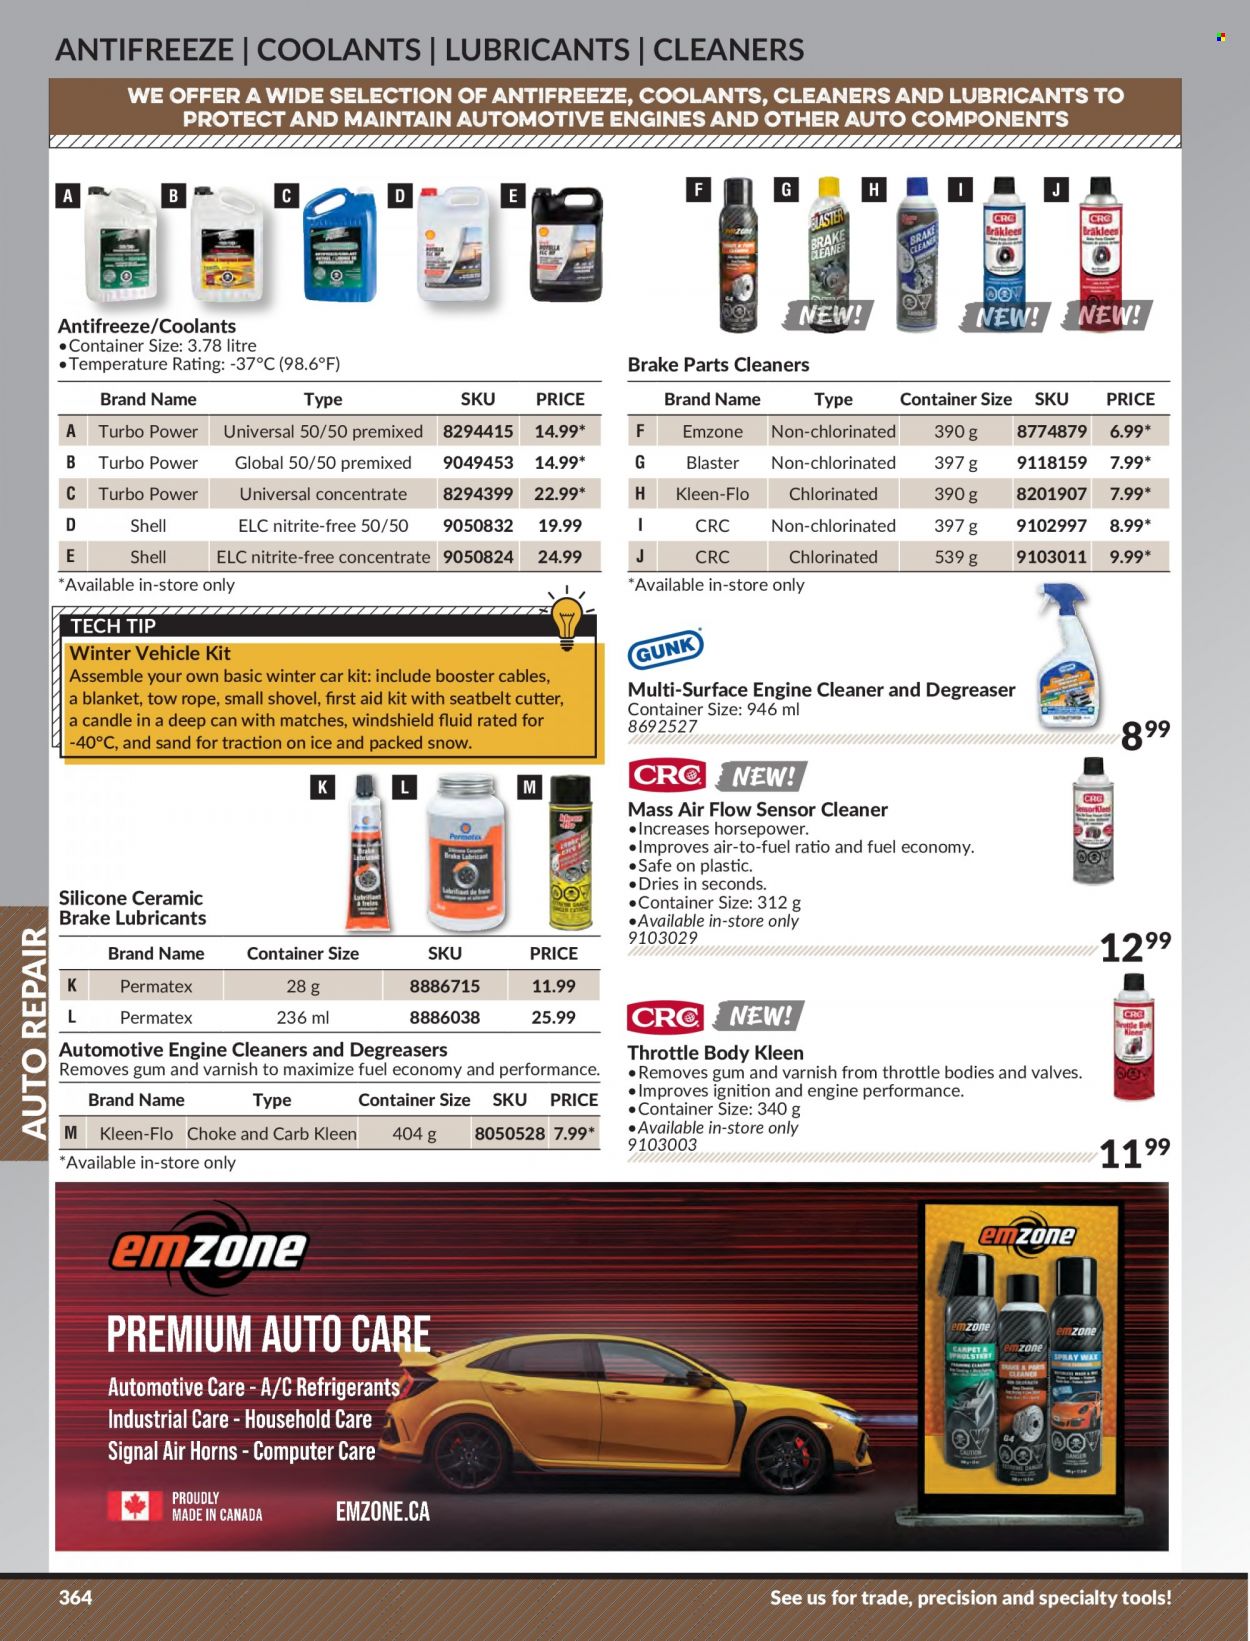 thumbnail - Princess Auto Flyer - Sales products - shovel, cutter, blanket, container, vehicle, first aid kit, booster cables, engine cleaner, cleaner, antifreeze, degreaser, Shell. Page 372.